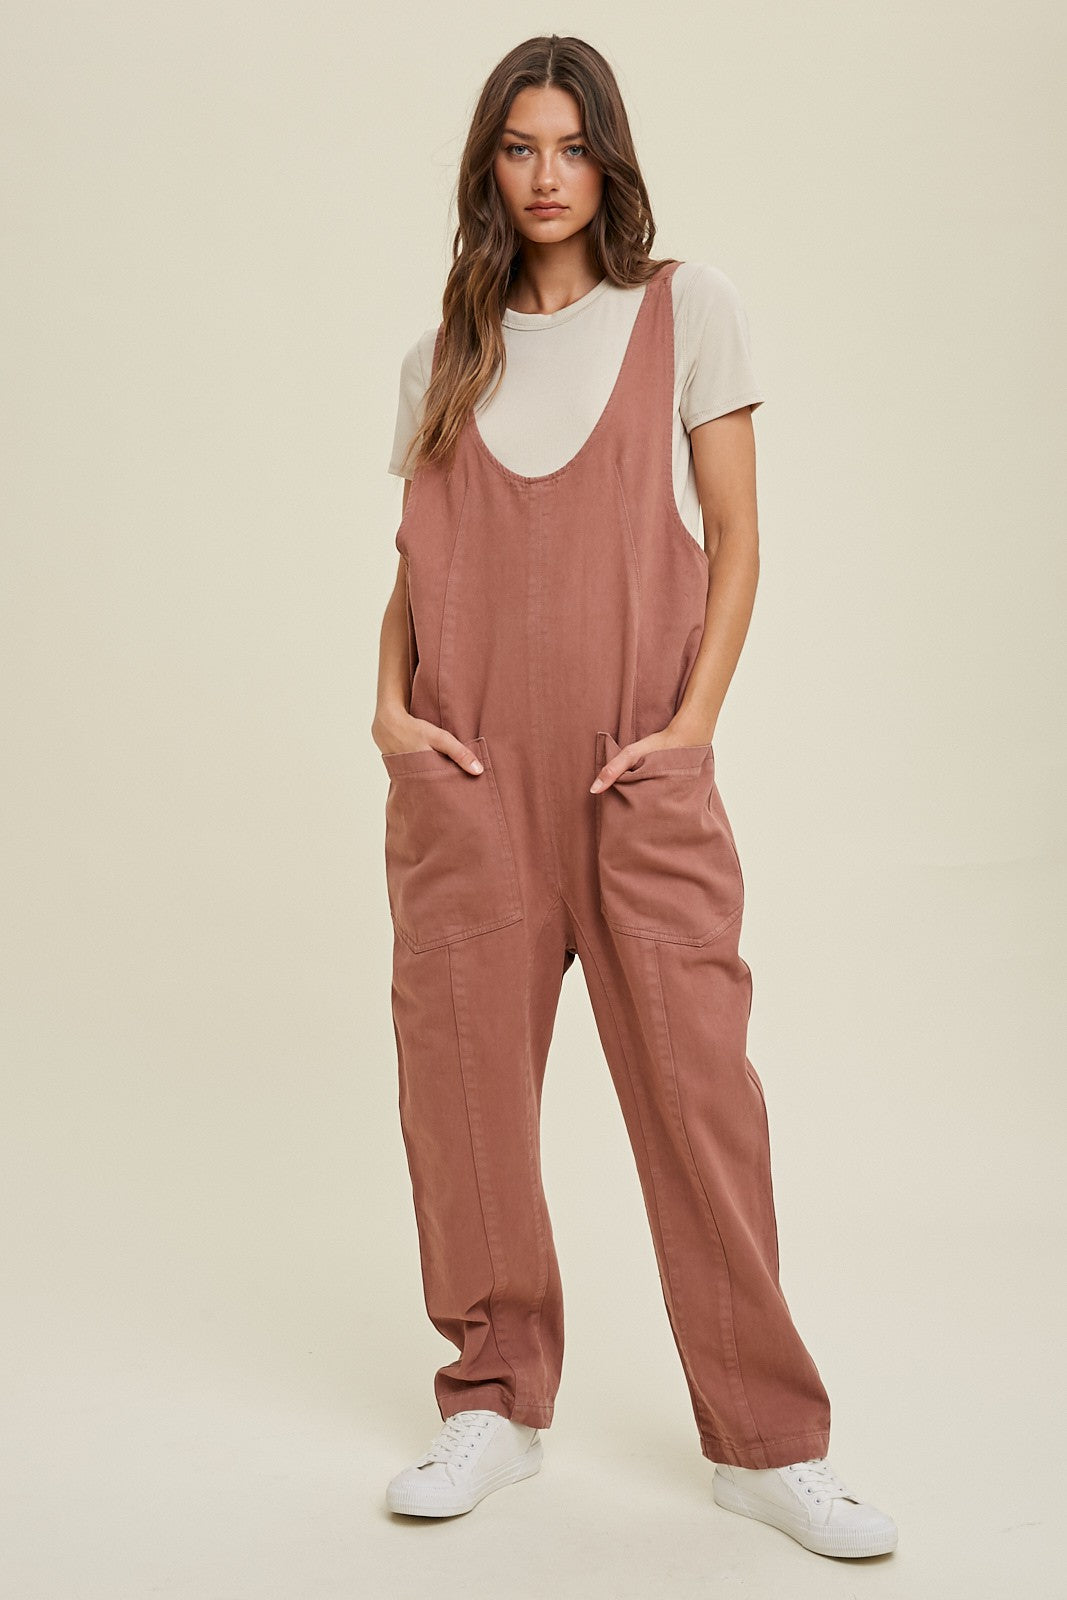 The Perry Denim Overall in Rose